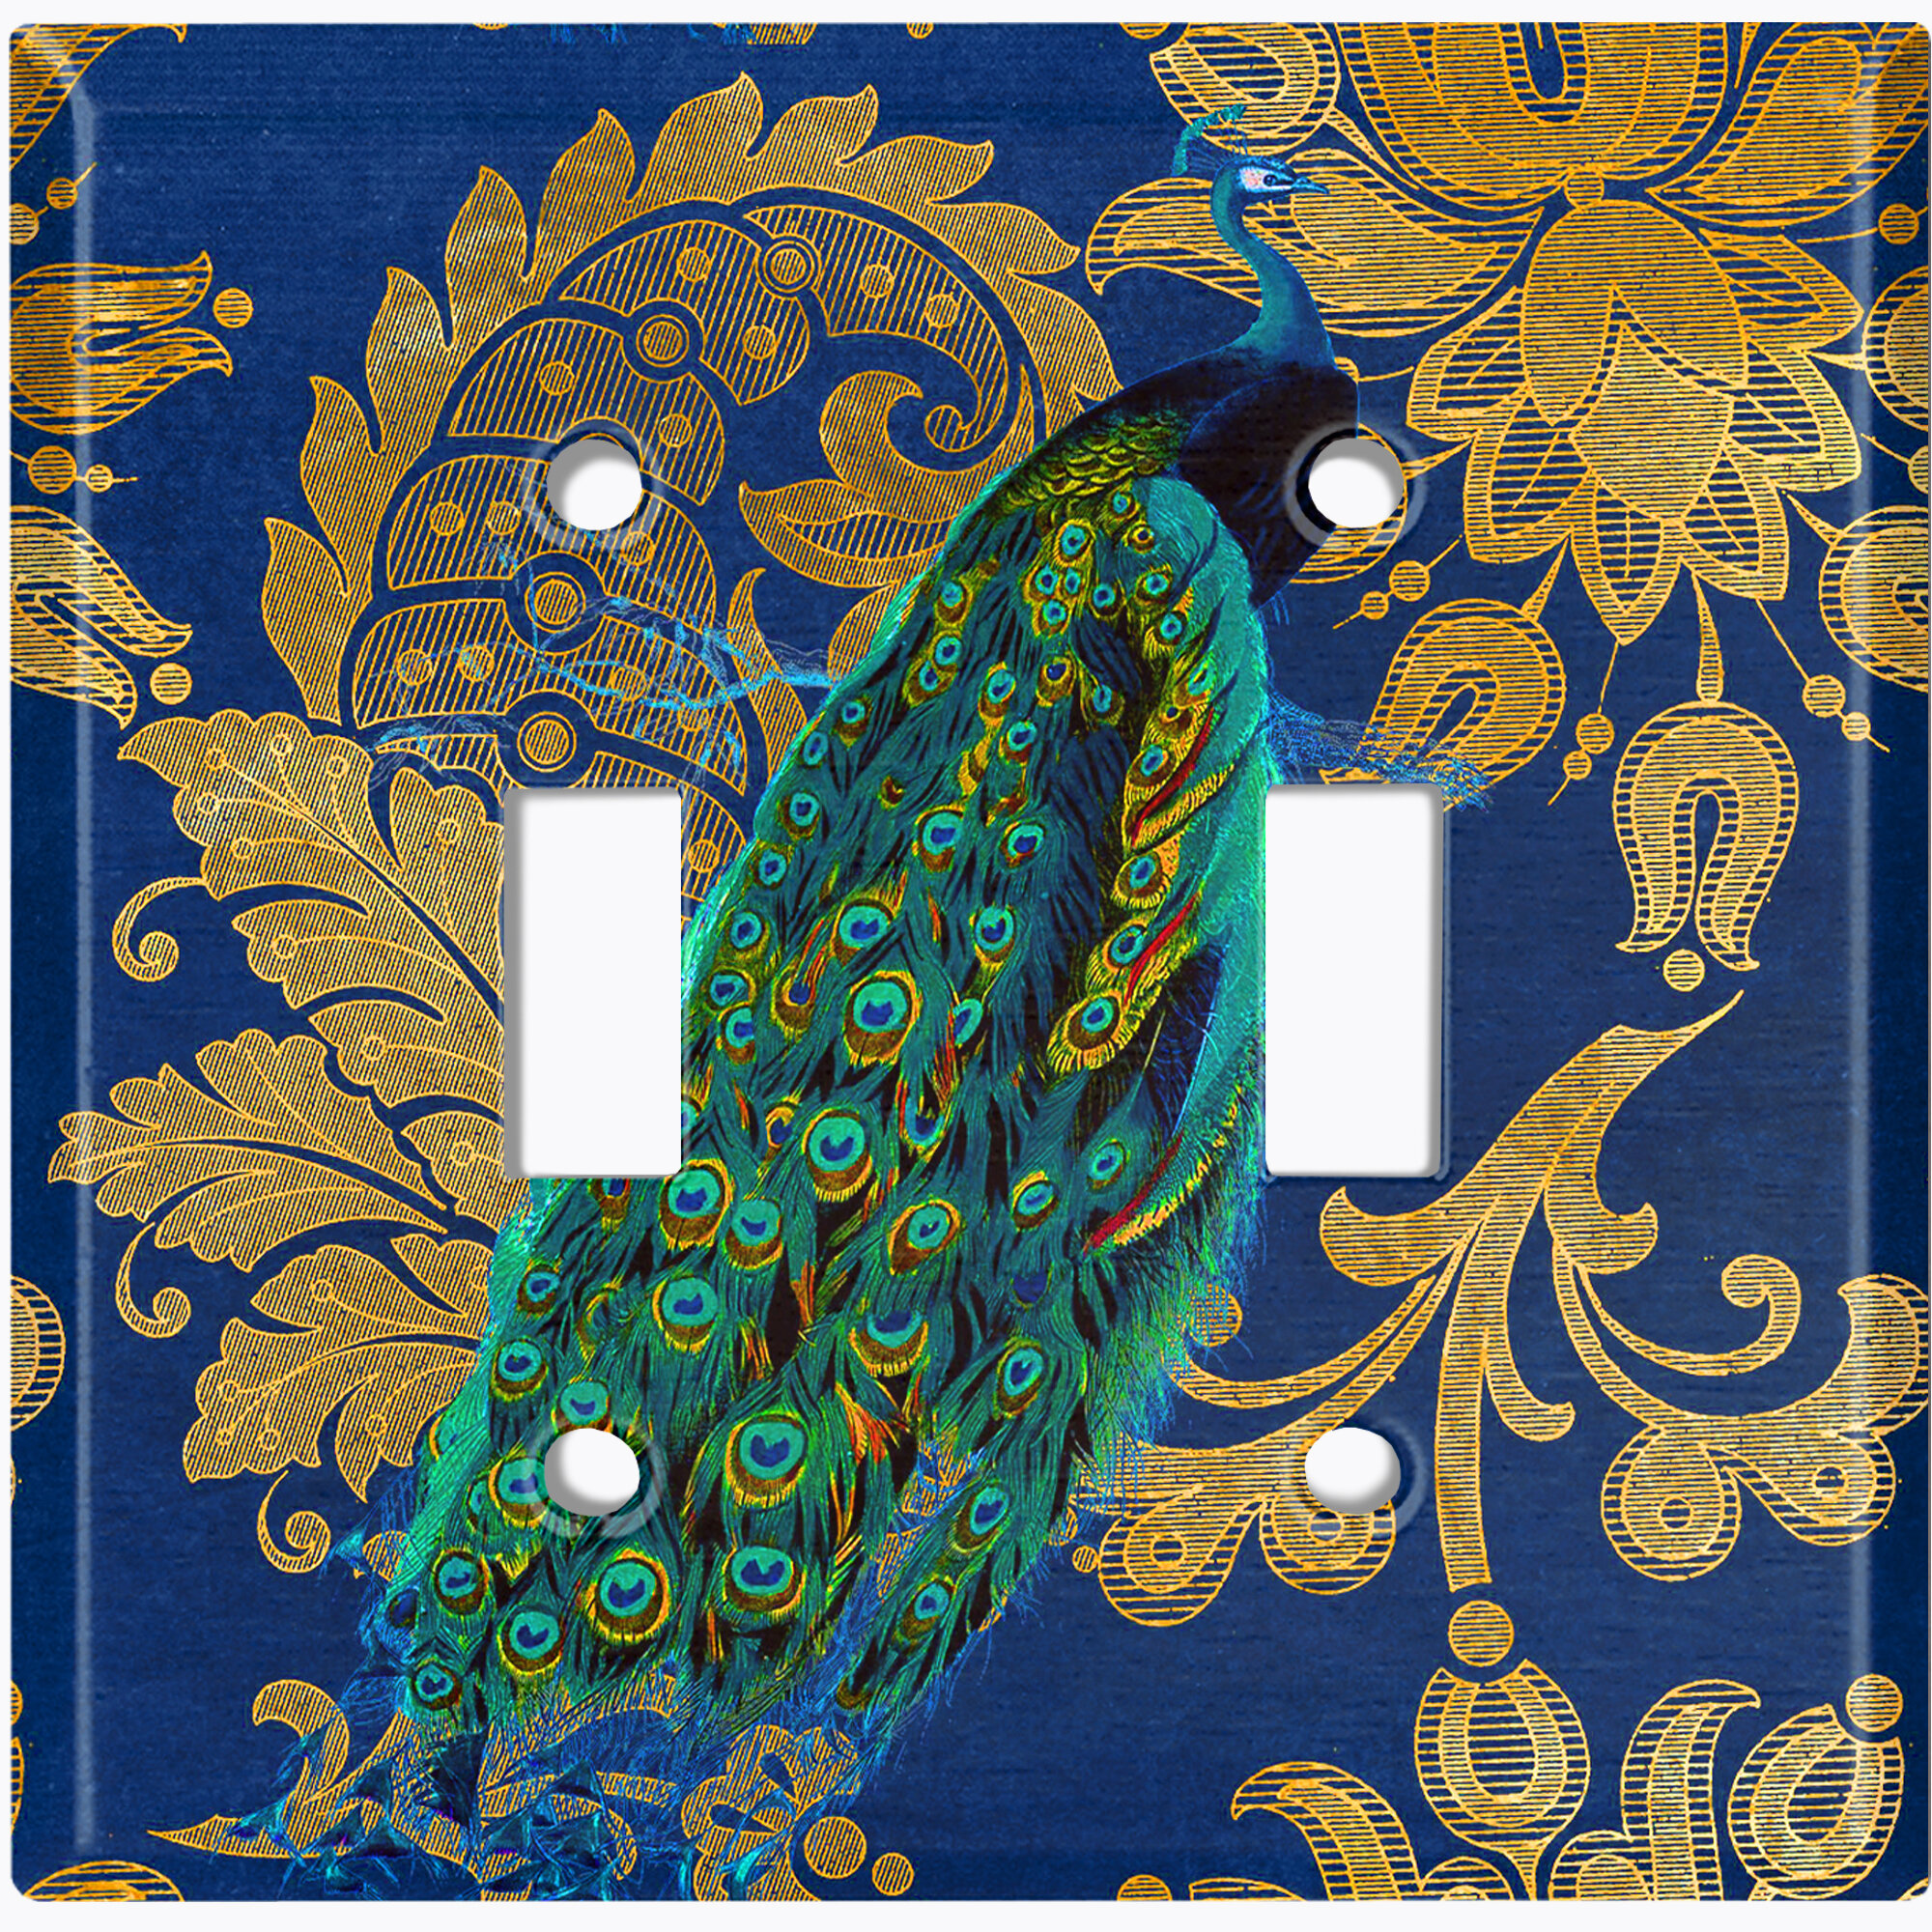 BLUE AND GREEN PEACOCKS HOME DECOR GFI OUTLET ROCKER LIGHT SWITCH PLATE 